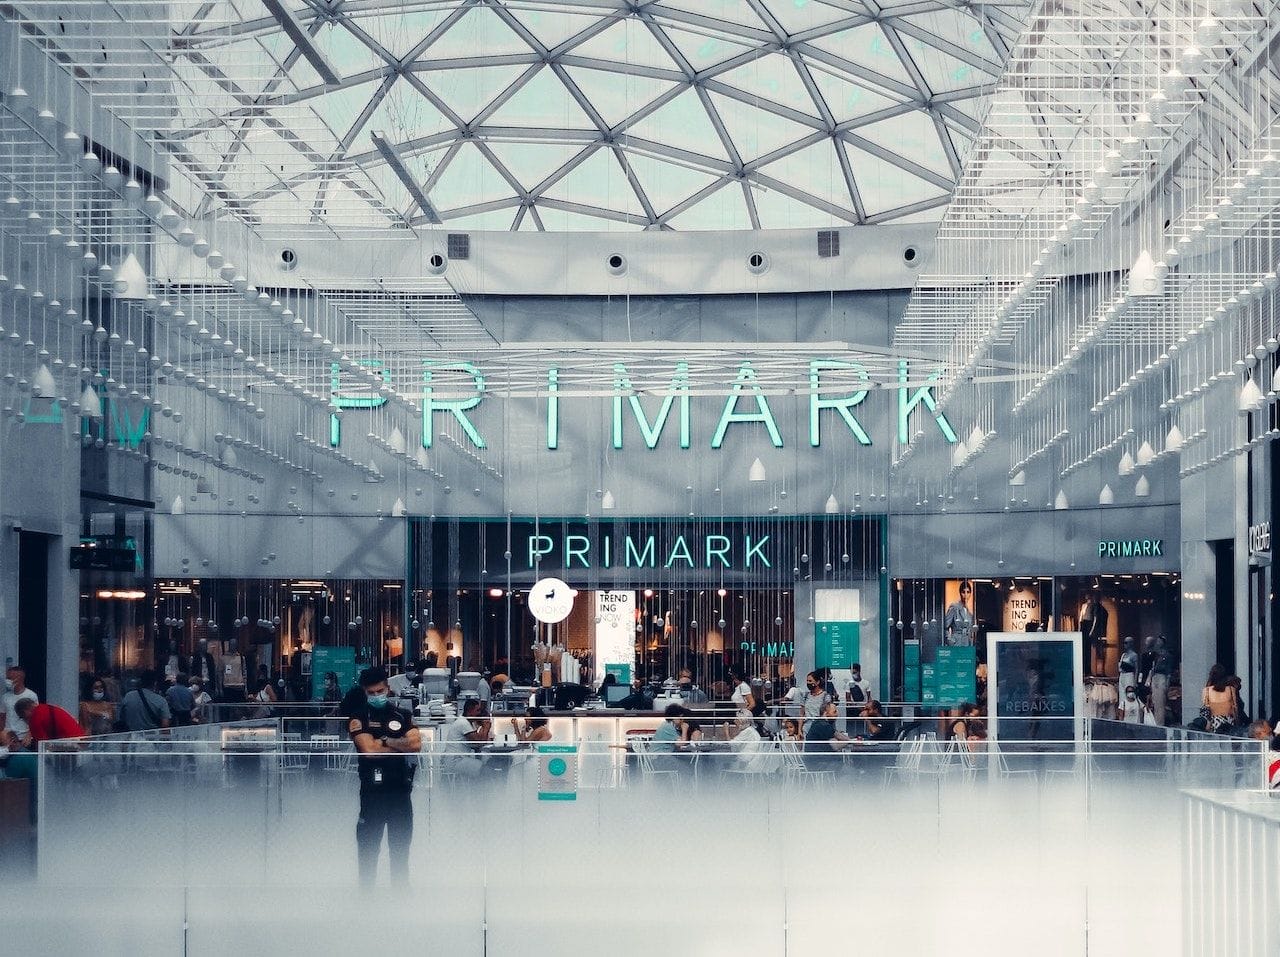 Primark recognises value in click & collect.